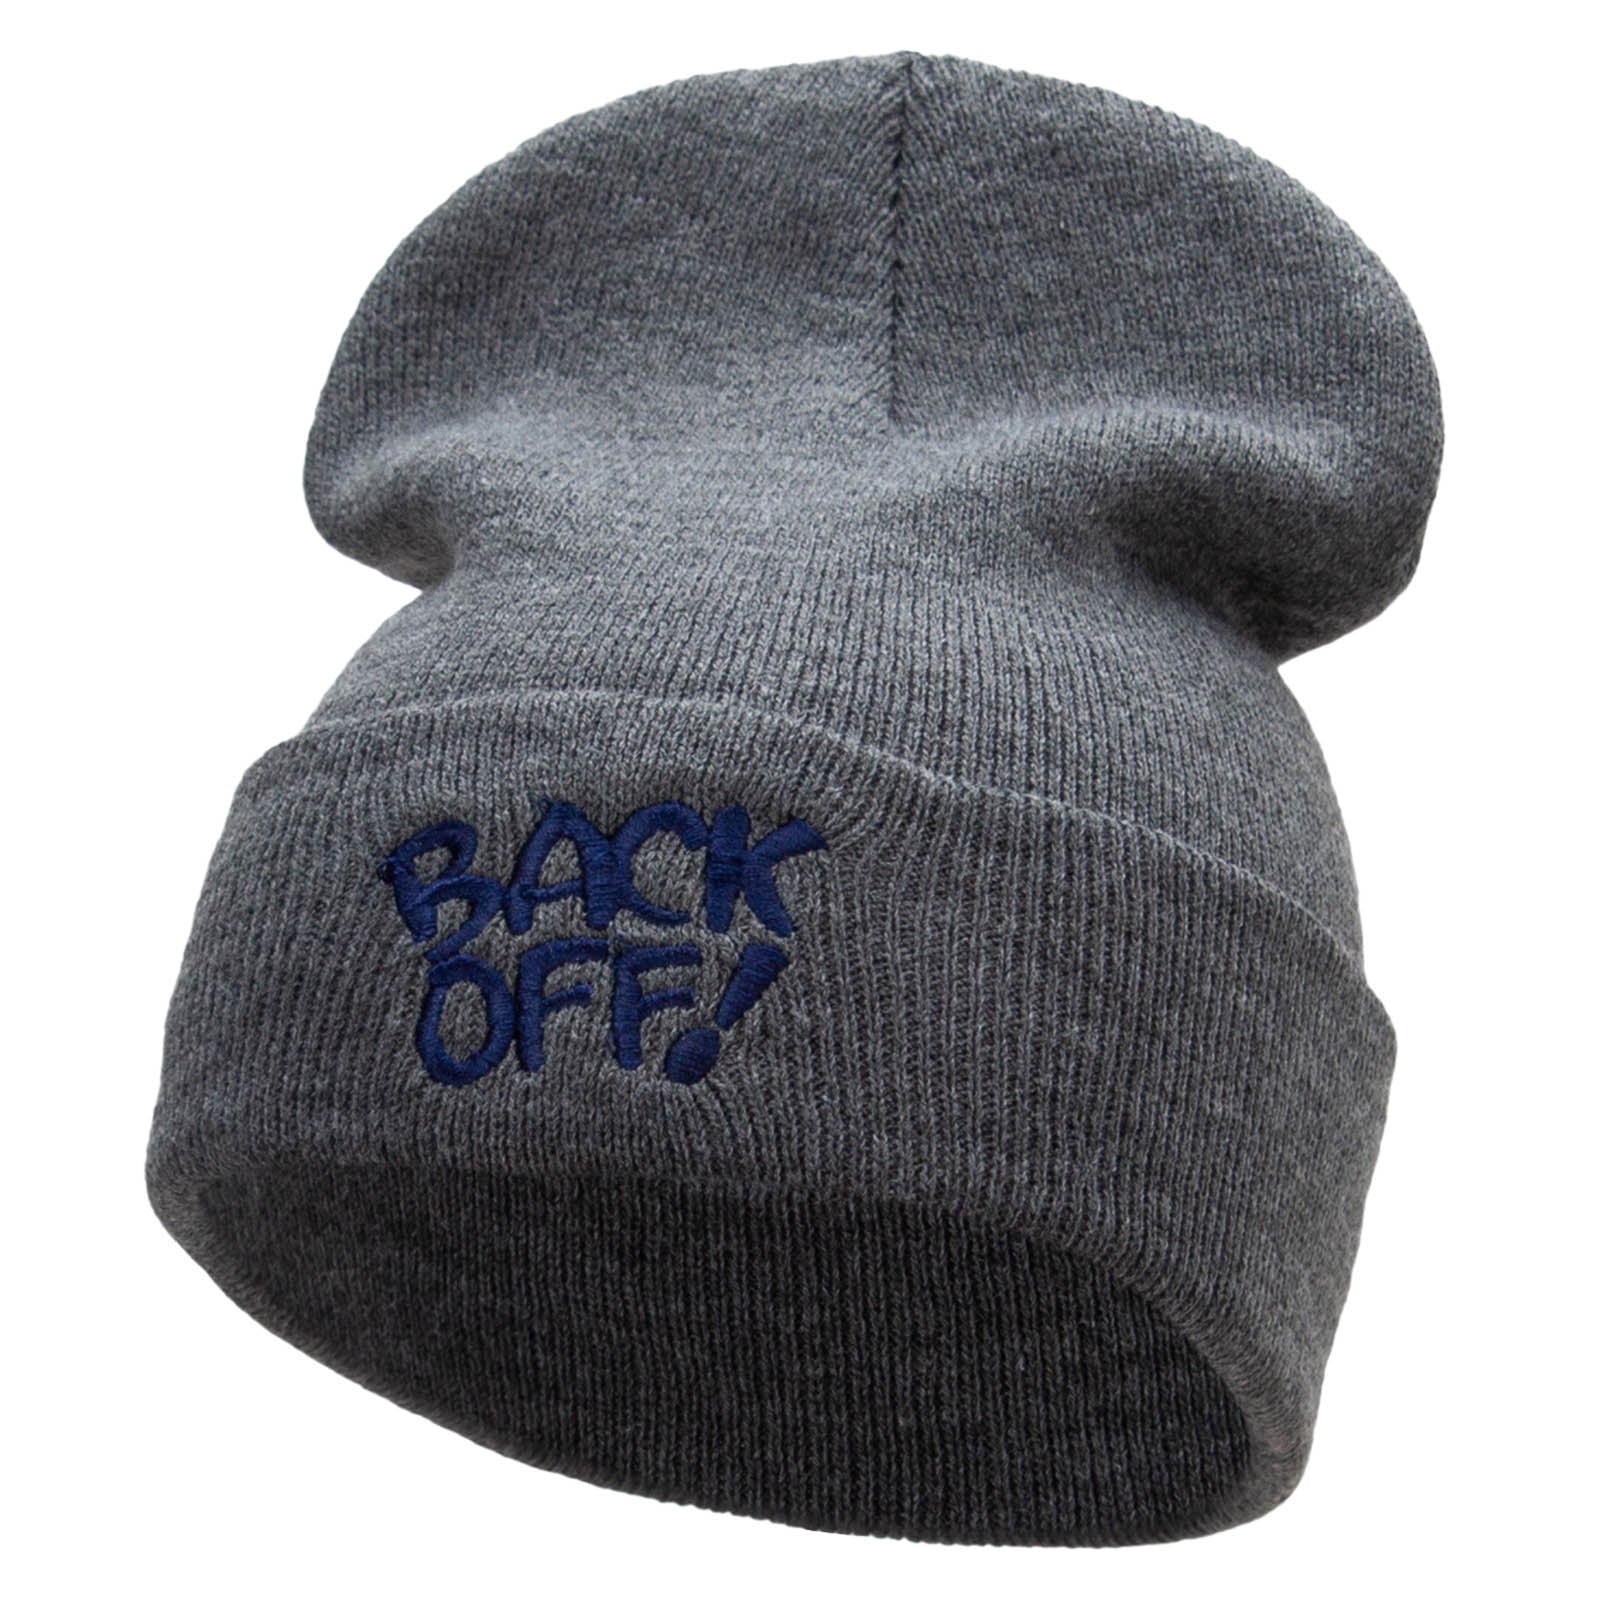 Back Off Phrase Embroidered 12 Inch Long Knitted Beanie - Heather Charcoal OSFM